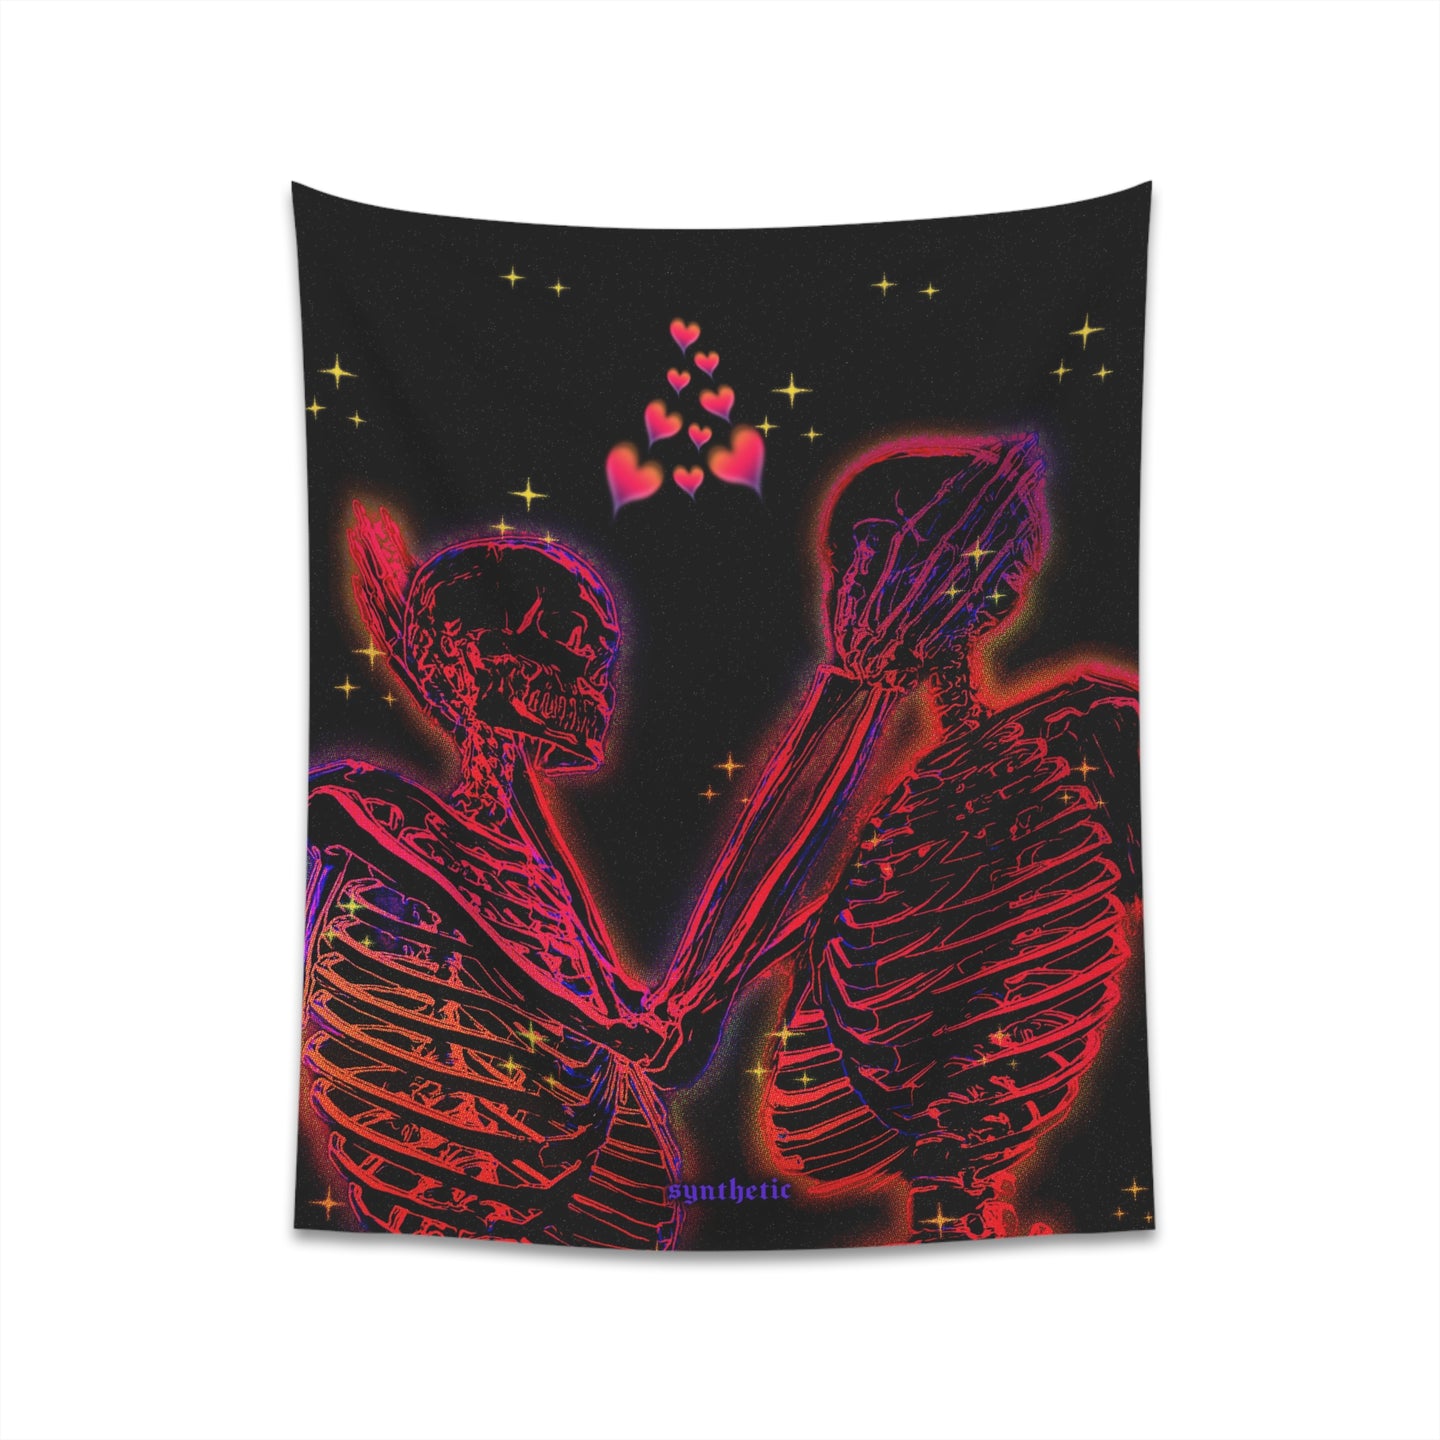 'this love could never die' tapestry